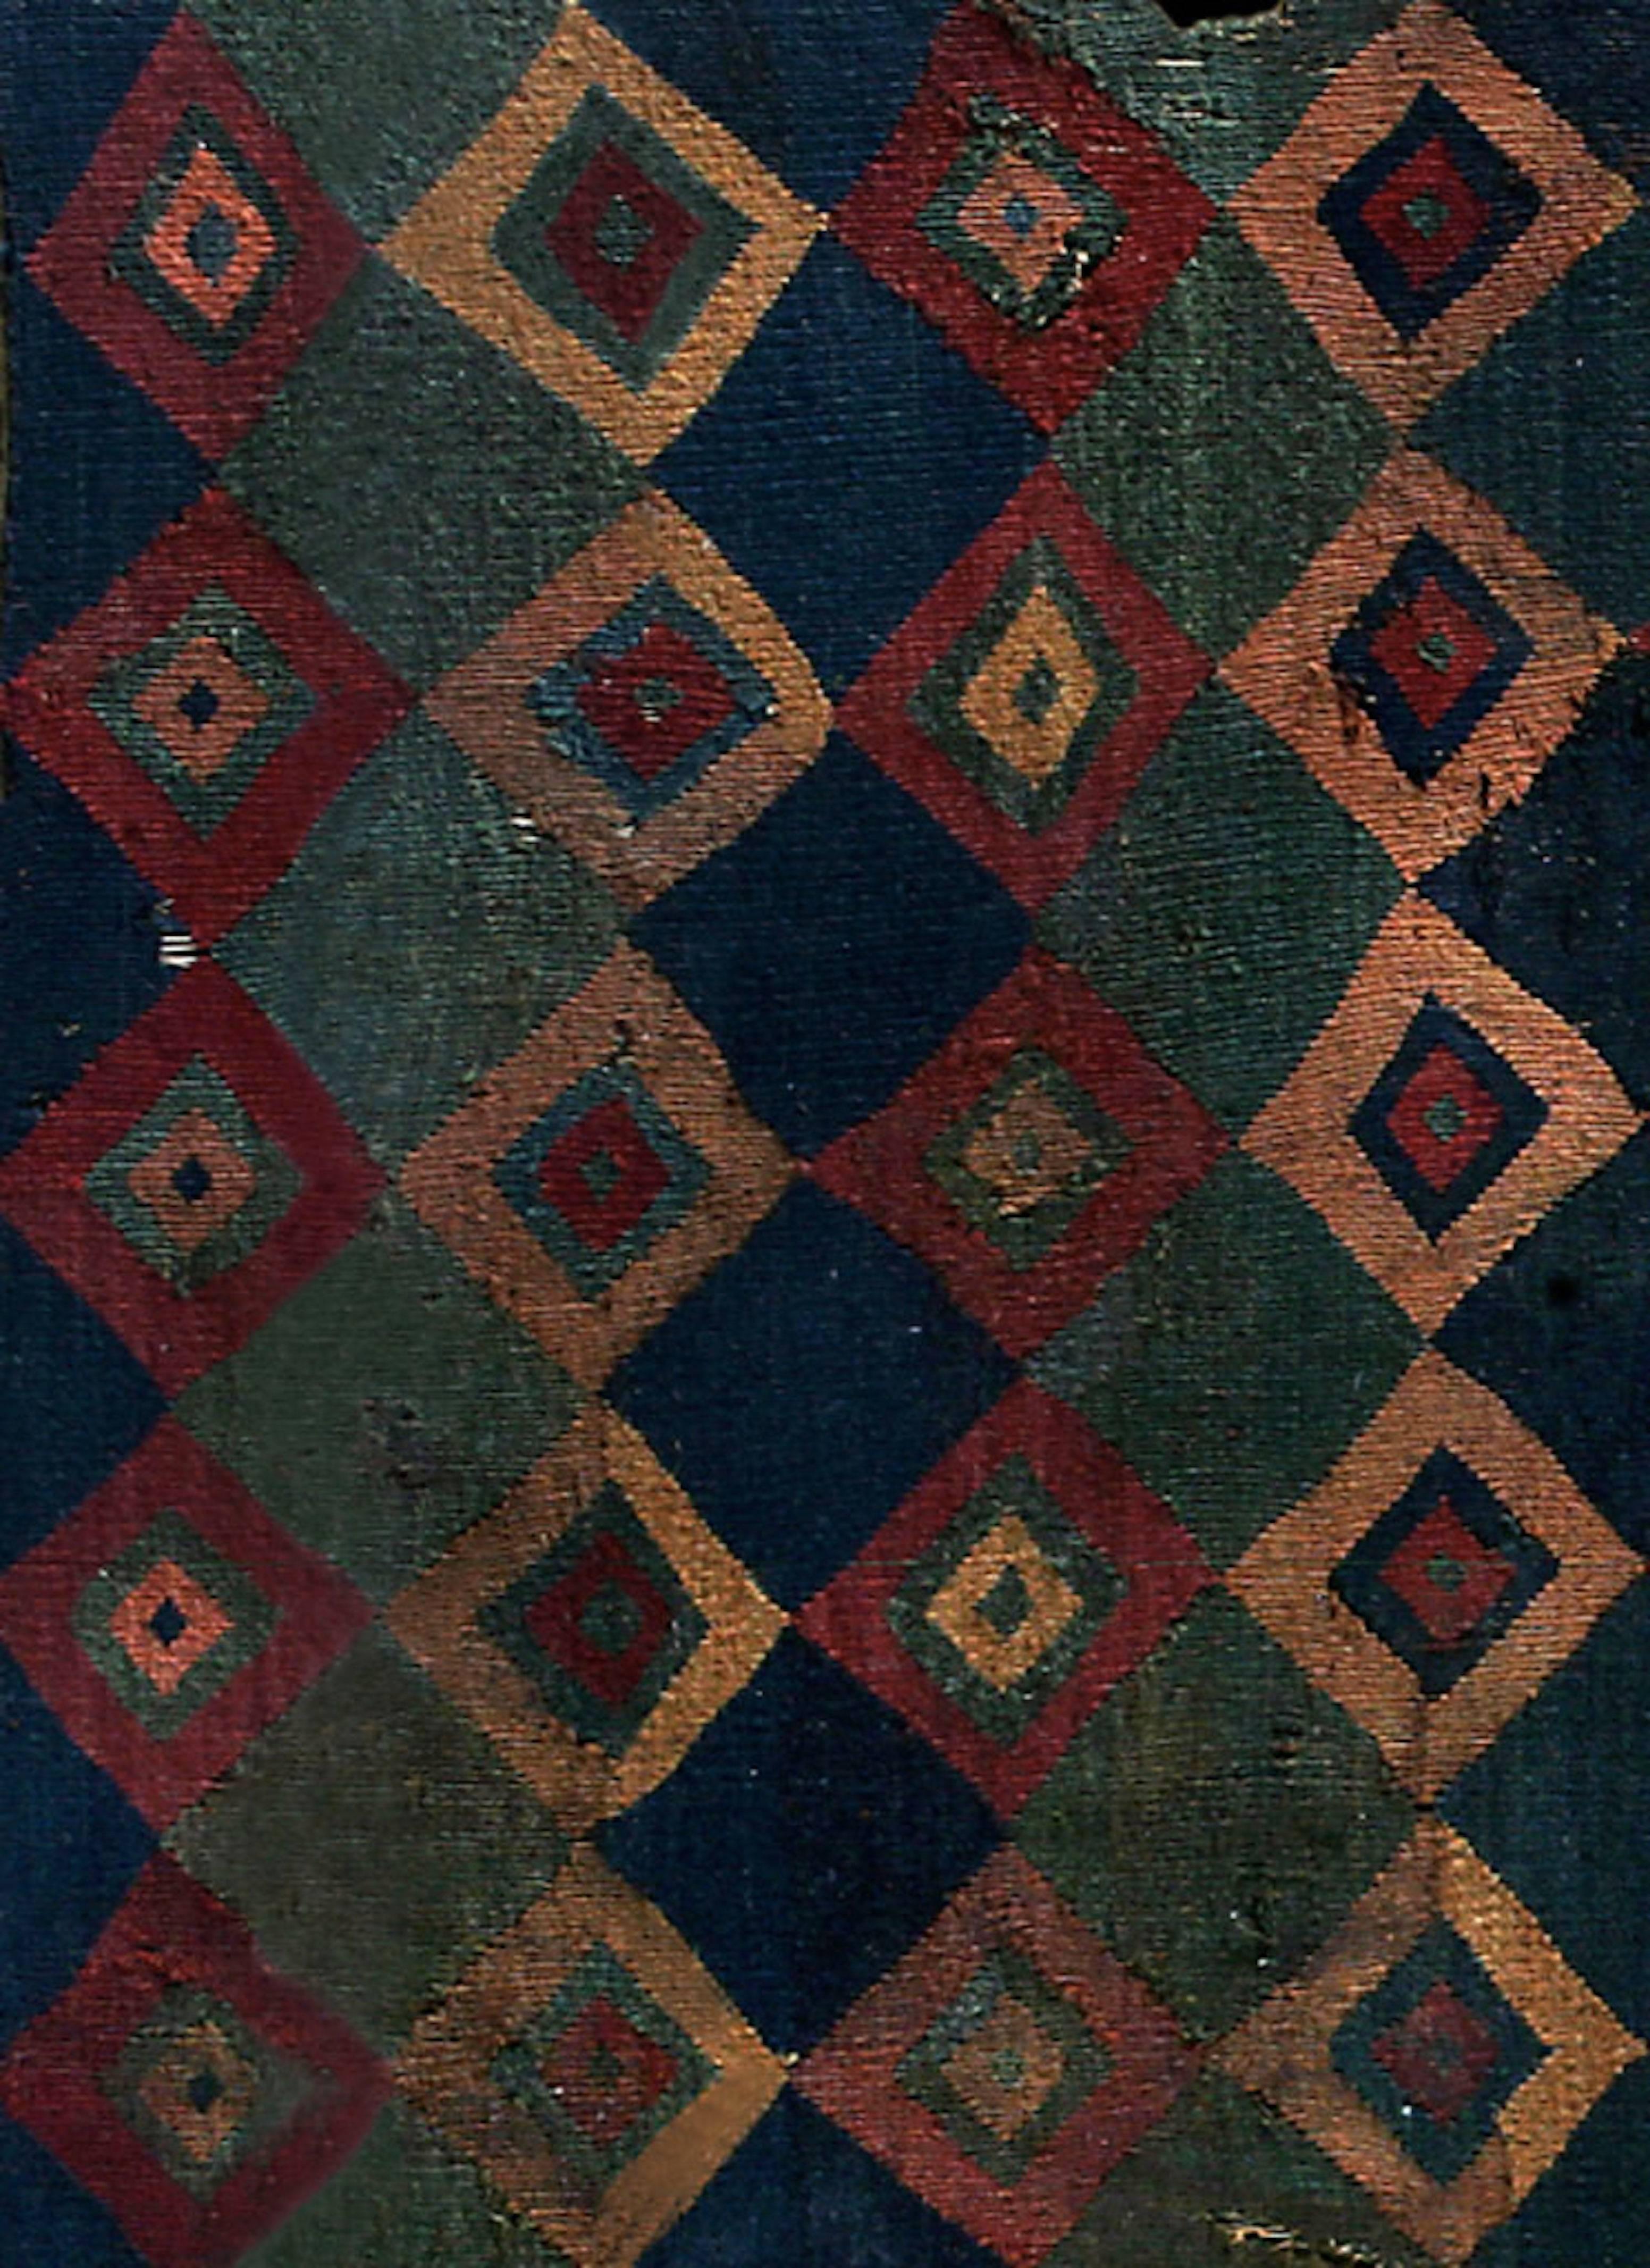 Magnificent Ceremonial Inca Tokapu of Multicolor Geometric Diamond Shapes.

Tokapu were textiles worn by the Inca elite consisting of geometric figures enclosed by rectangles or squares. There is evidence that the designs were an ideographic